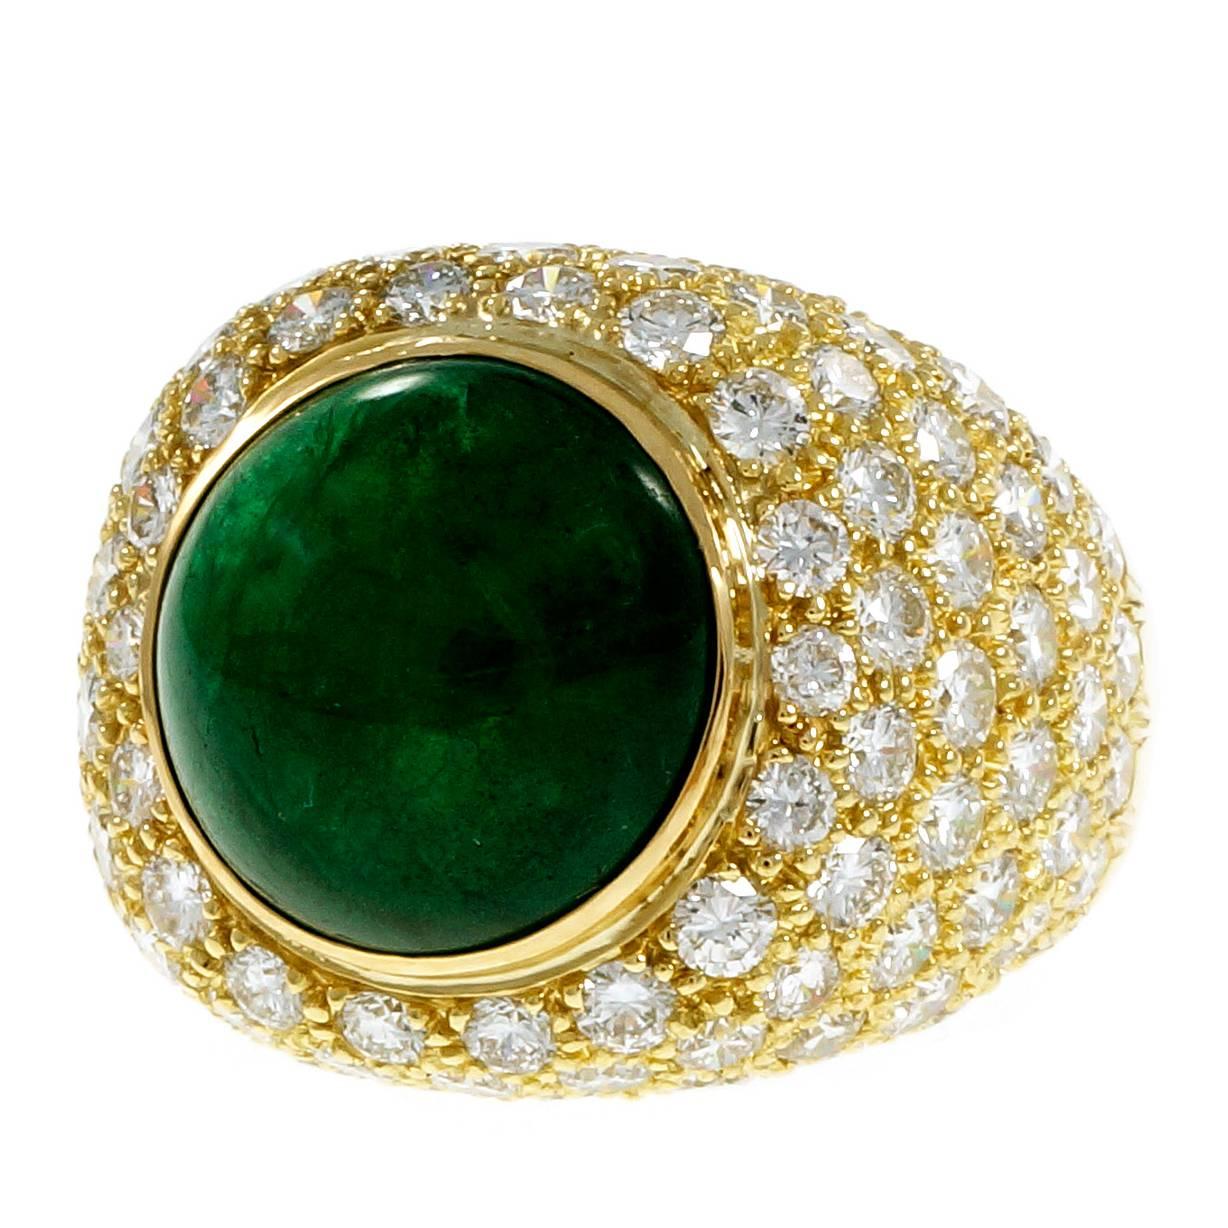 GIA Certified 9.11 Carat Green Cabochon Emerald Diamond Dome Gold Cocktail Ring